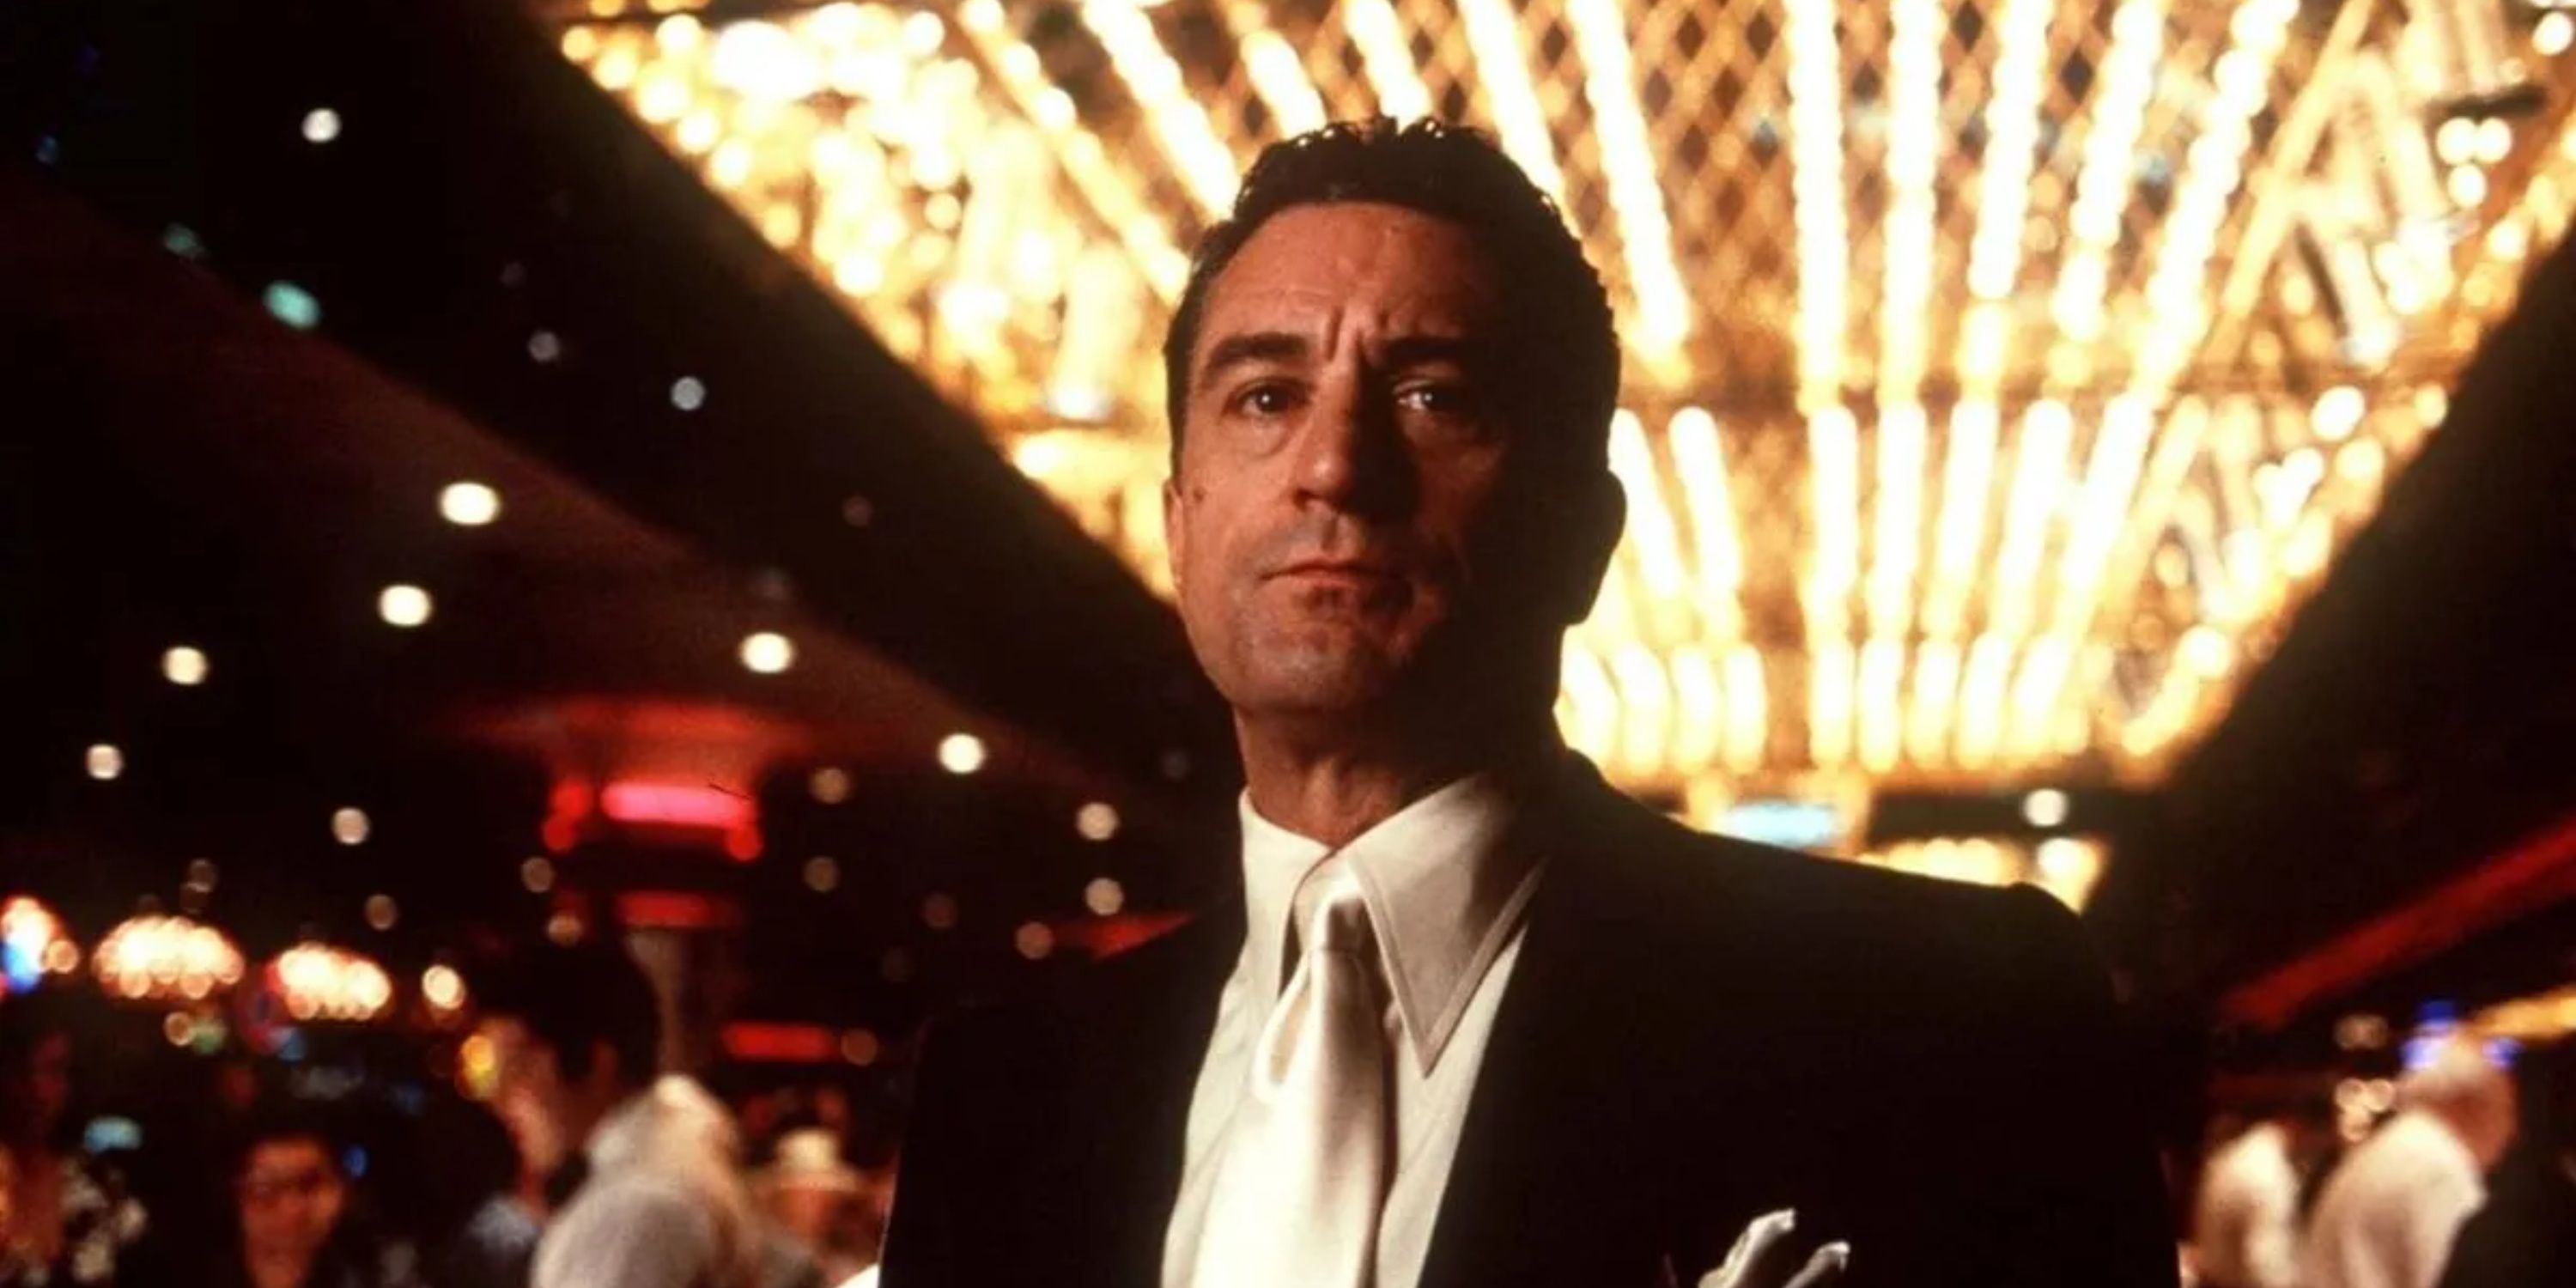 Man and black suit in brightly lit casino